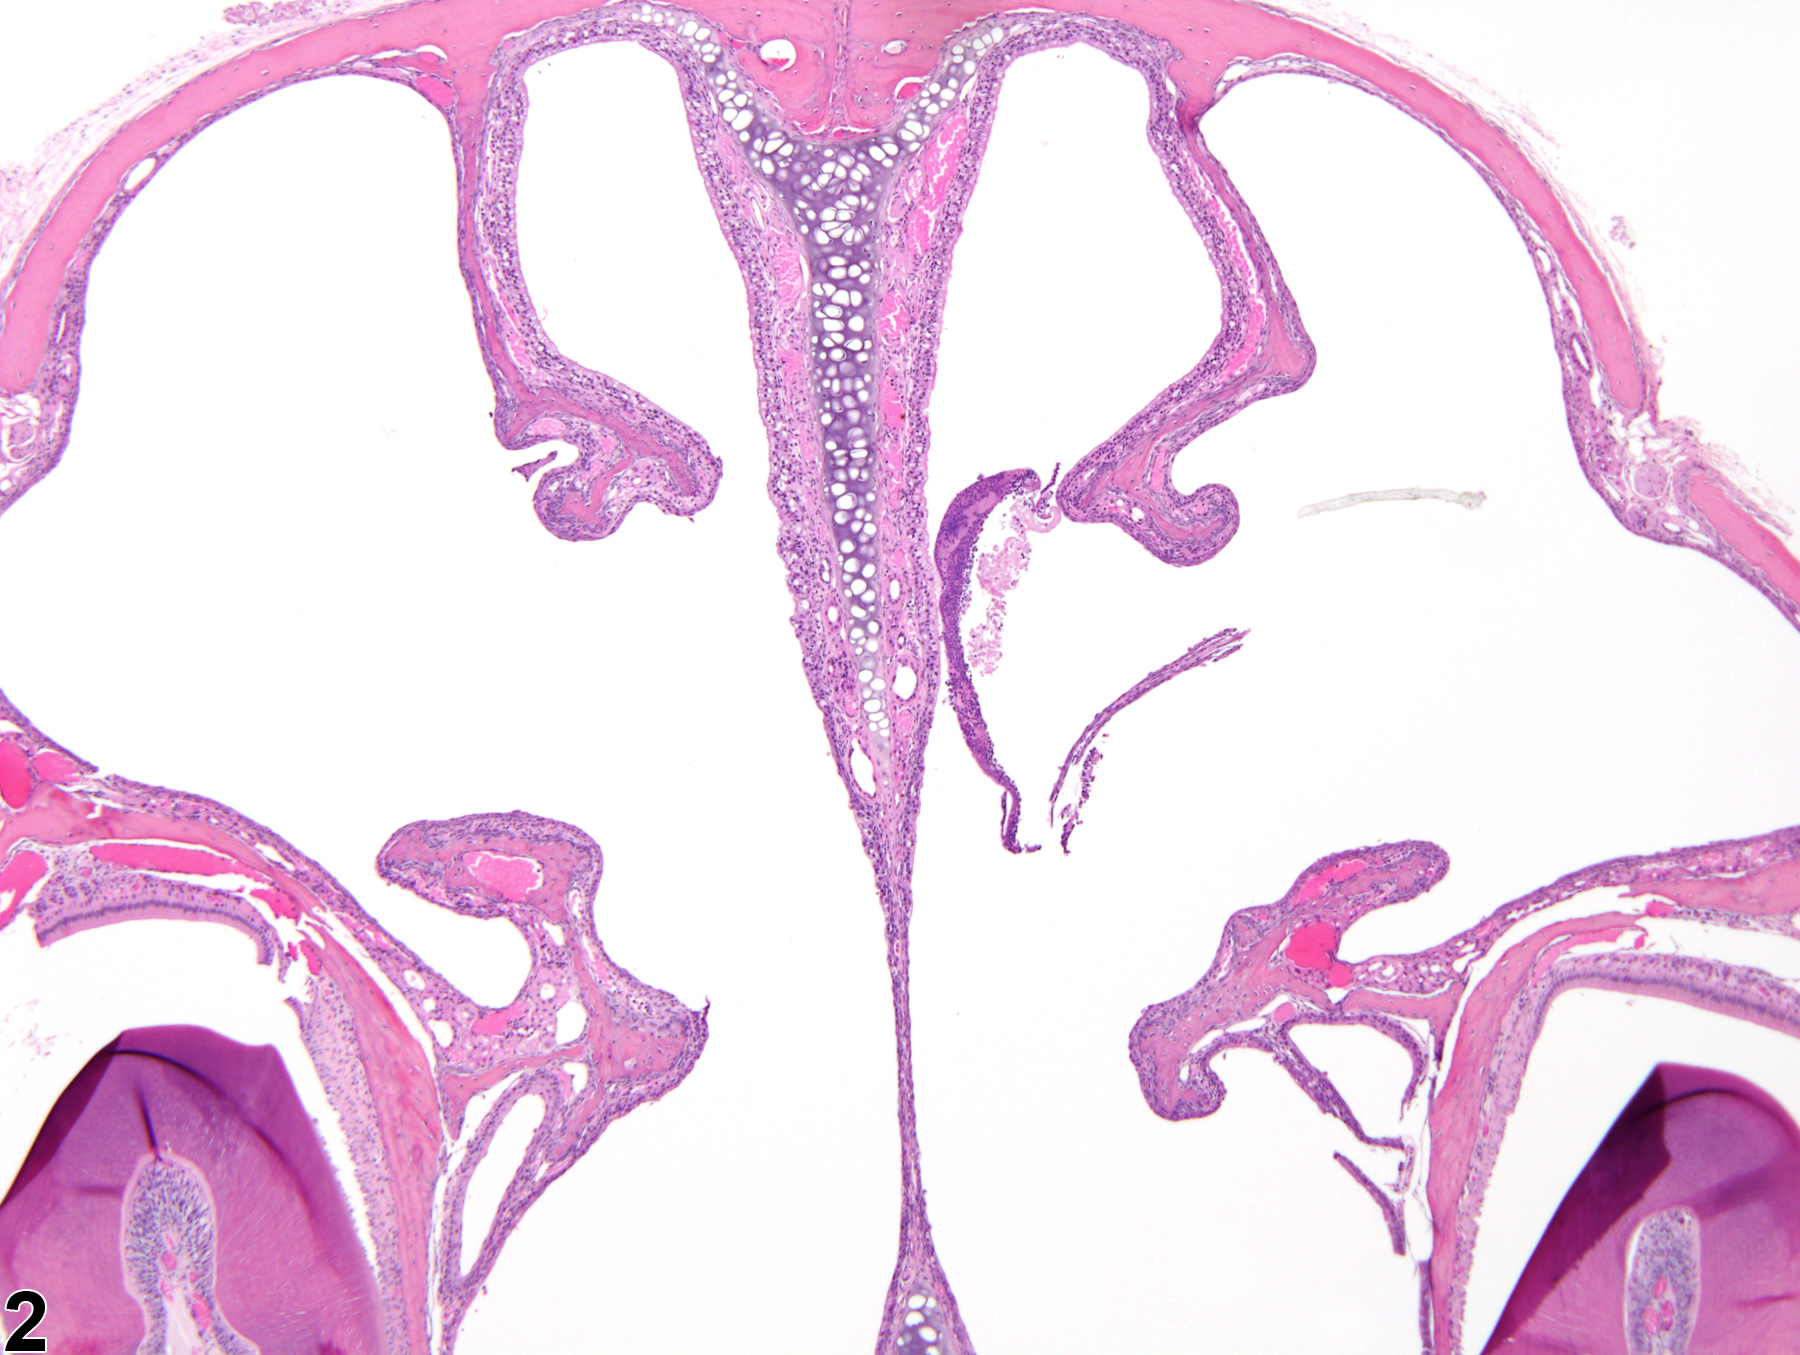 Image of atrophy in the nose, turbinate from a male B6C3F1/N mouse in a subchronic study